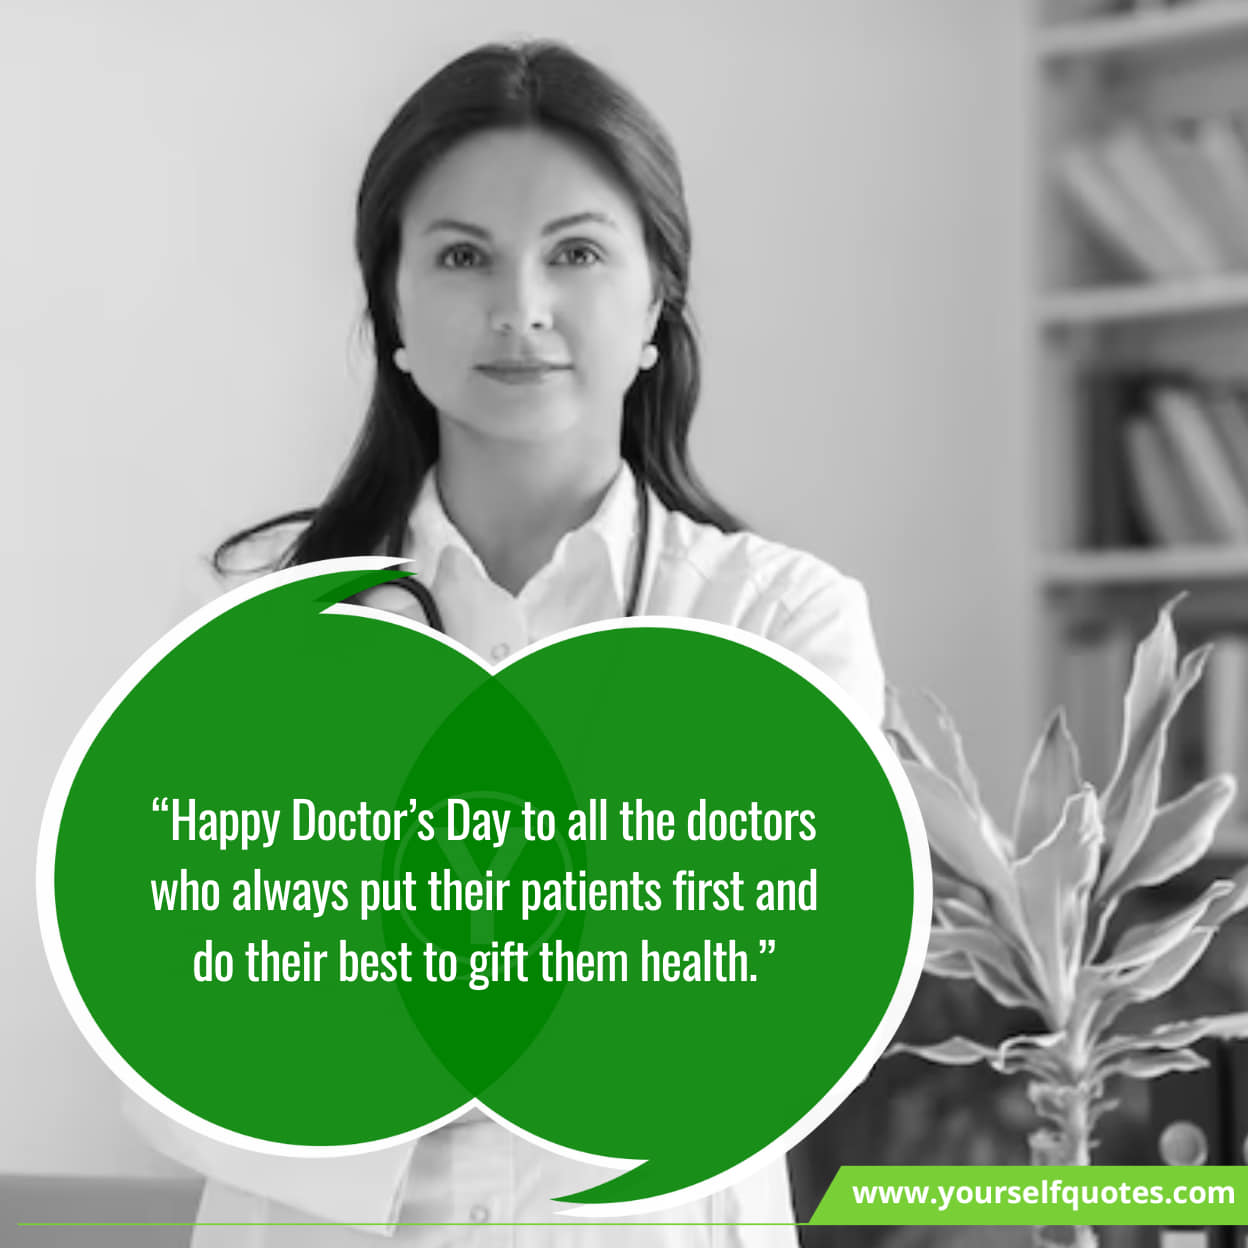 Honoring the dedication of doctors on their special day